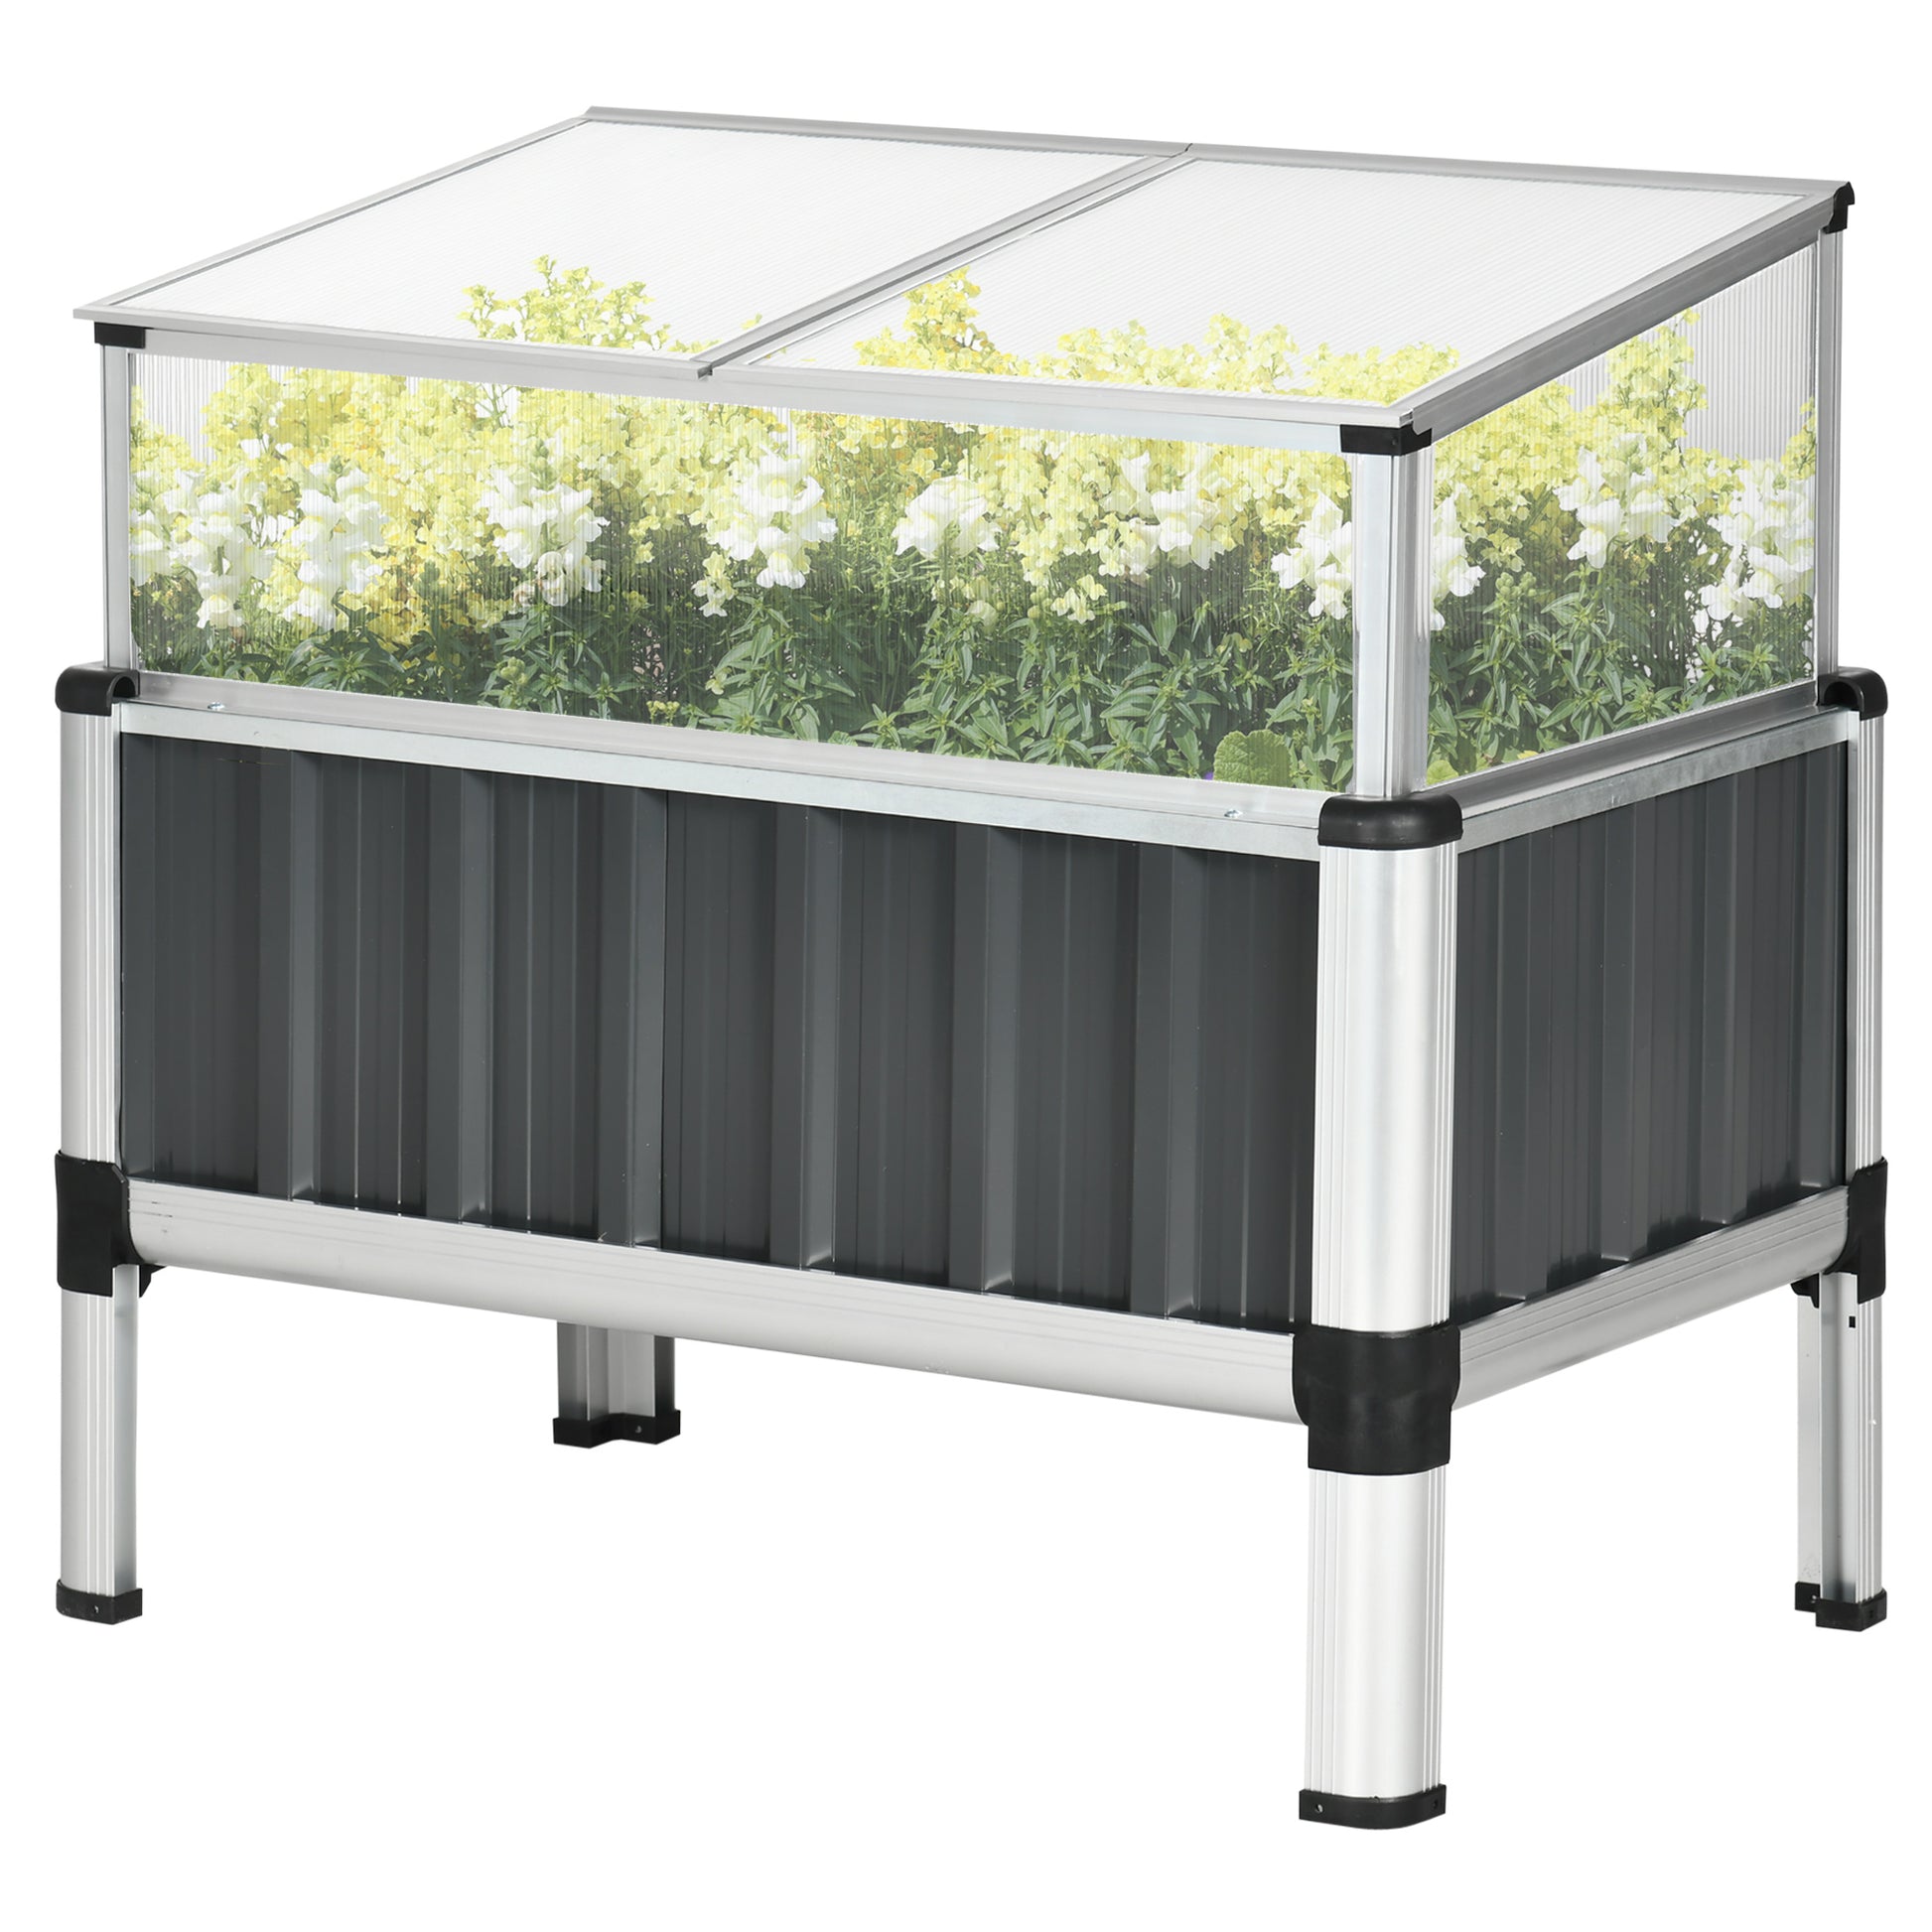 31"x20"x29" Raised Garden Bed with Greenhouse, Windows, Galvanized Steel Frame for Vegetables Flowers Herbs, Dark Grey at Gallery Canada